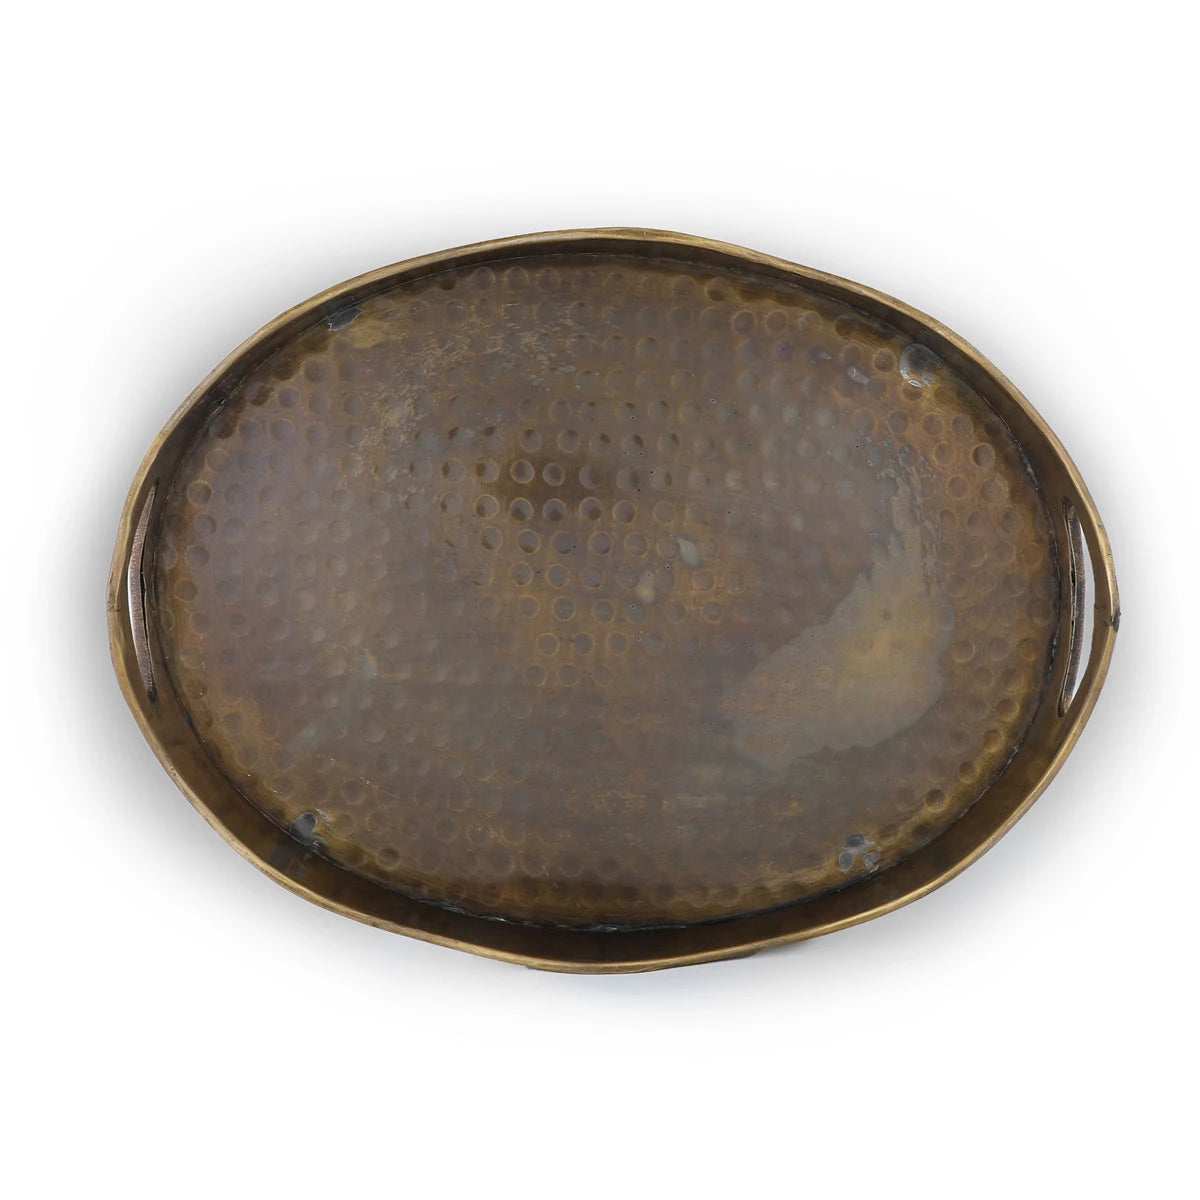 Top View of Vintage Themed Brass Metal Decorative Tray With Hand Hammered Base Texture